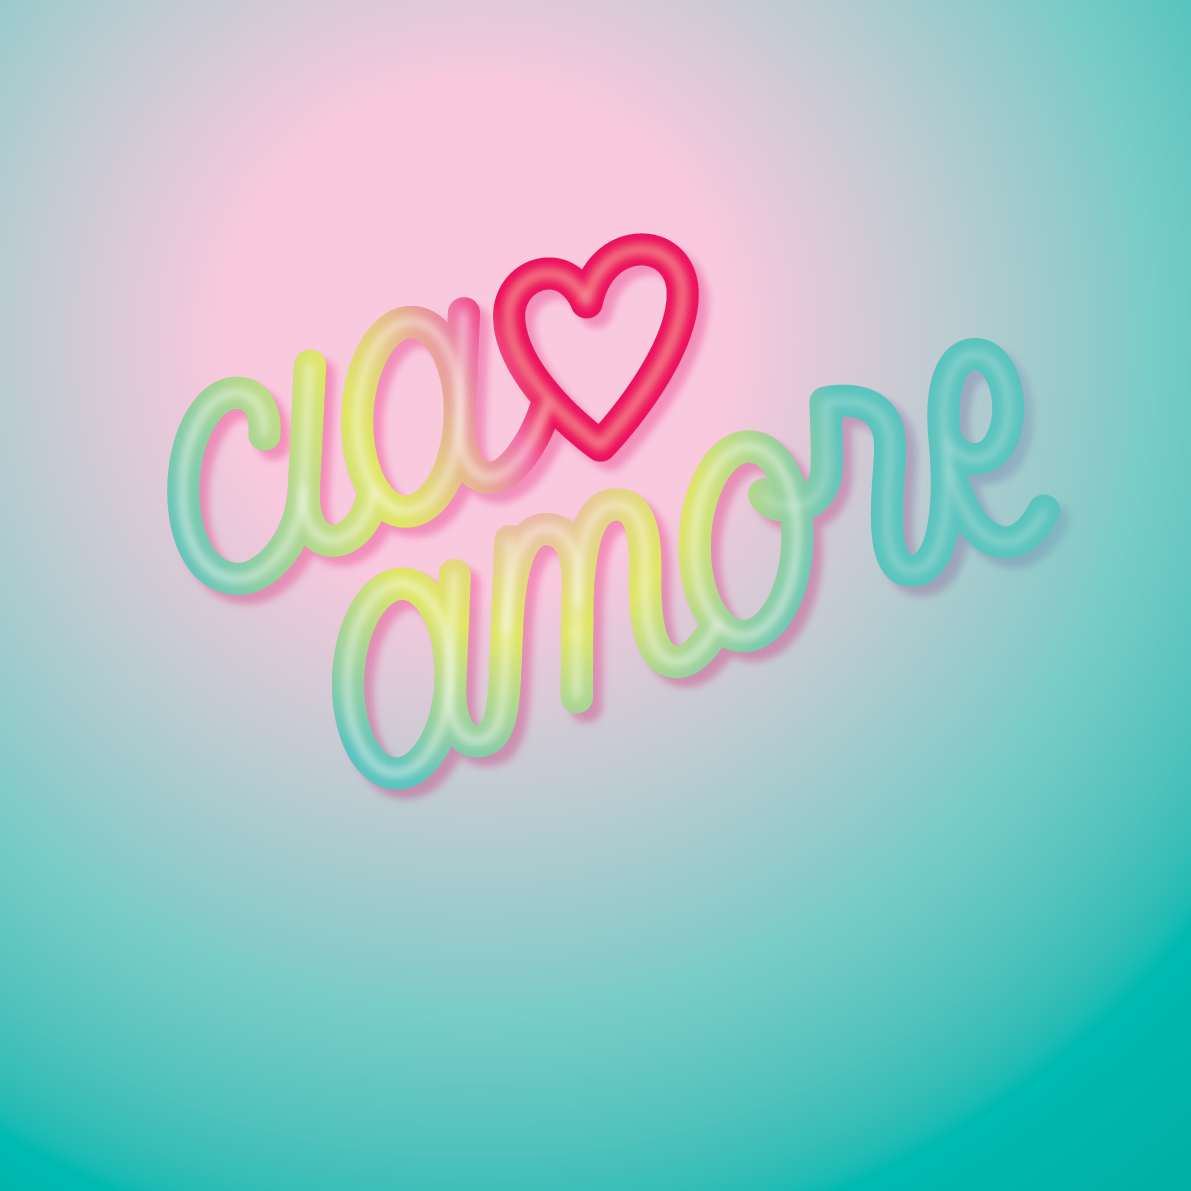 /dms1191  /cargobar-event-pictures/untitled8/untitled1/untitled/ciao-amore/ciao%20amore.jpg